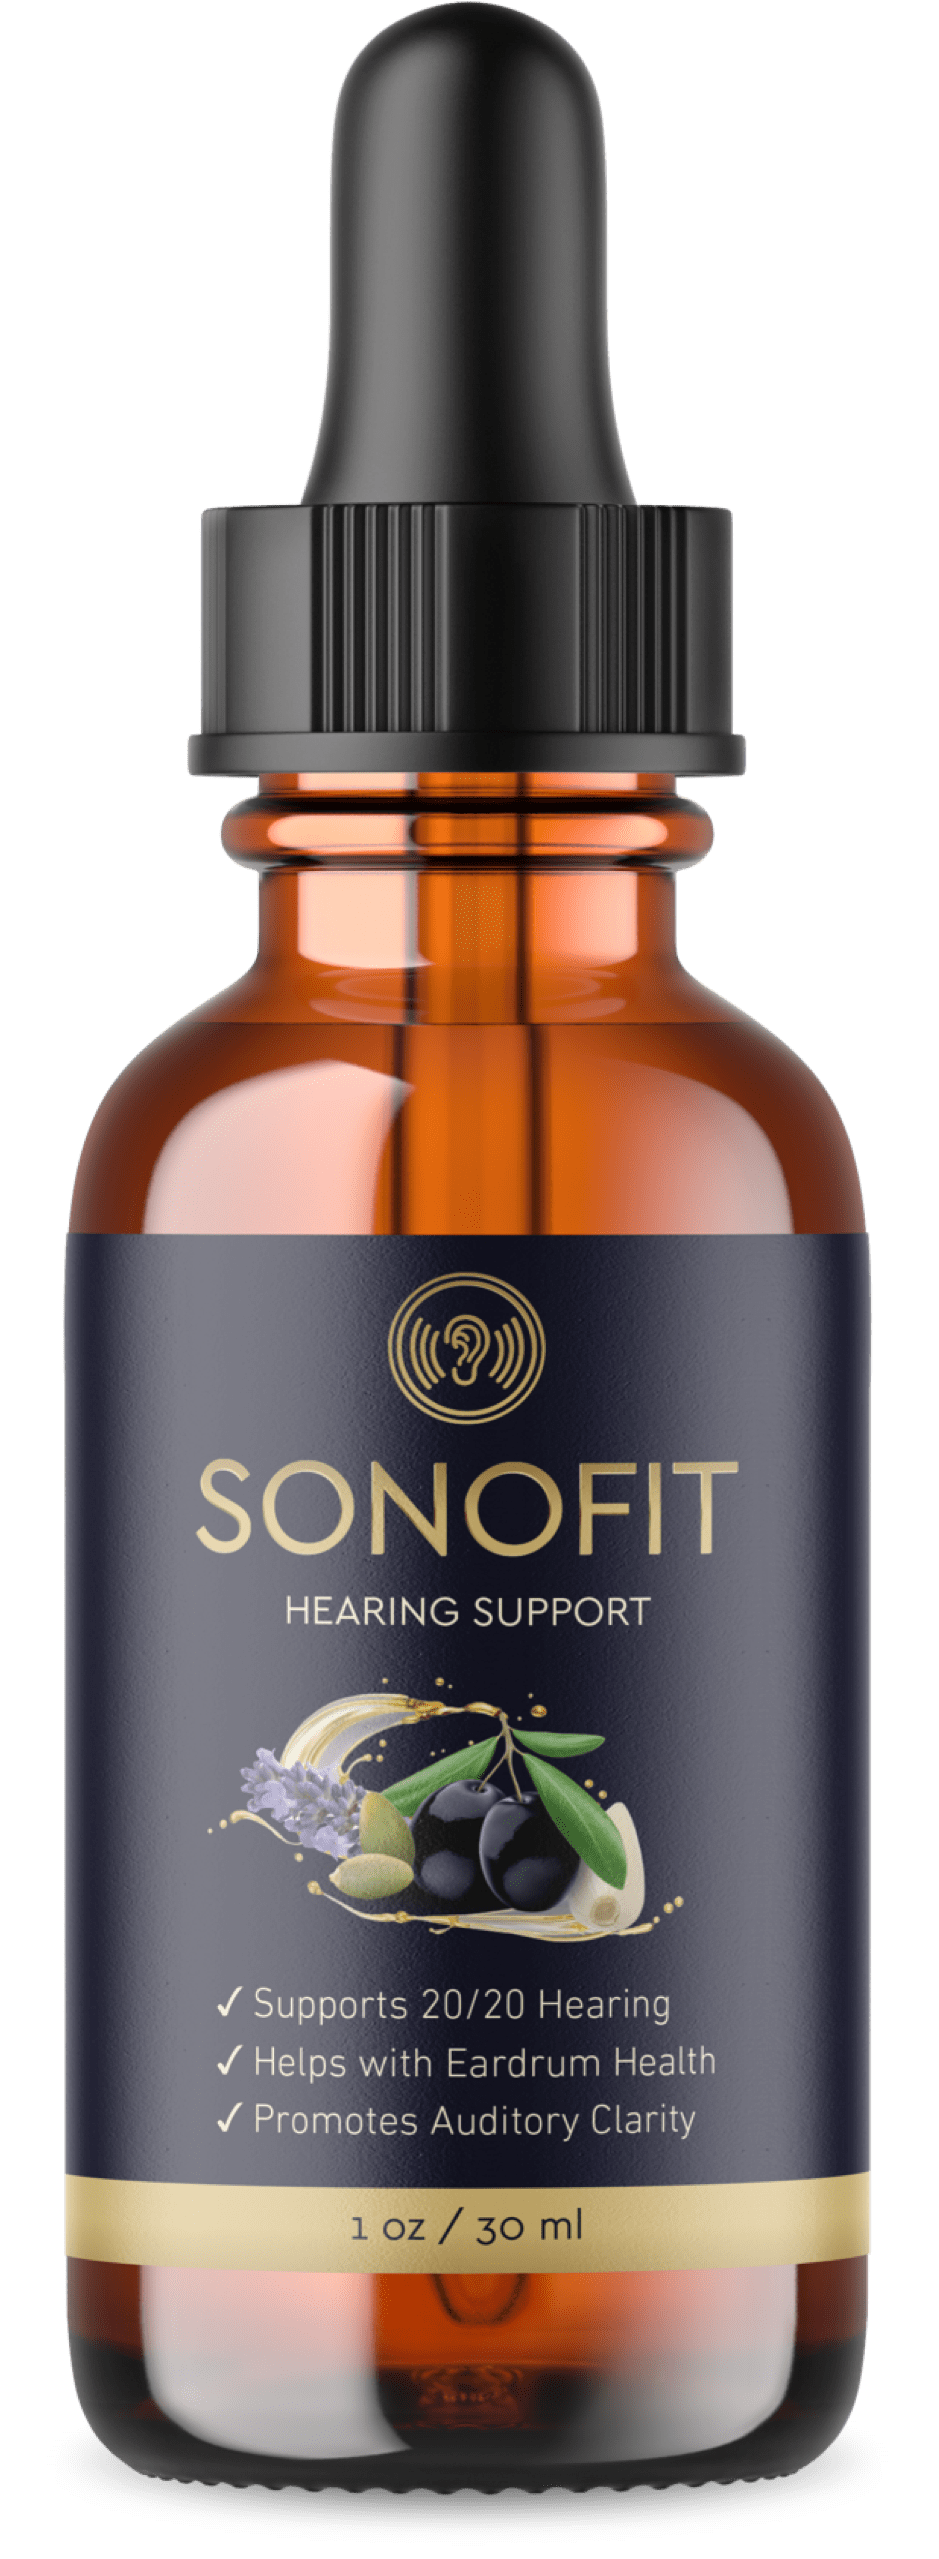 Get fit with Sonofit - Order Now